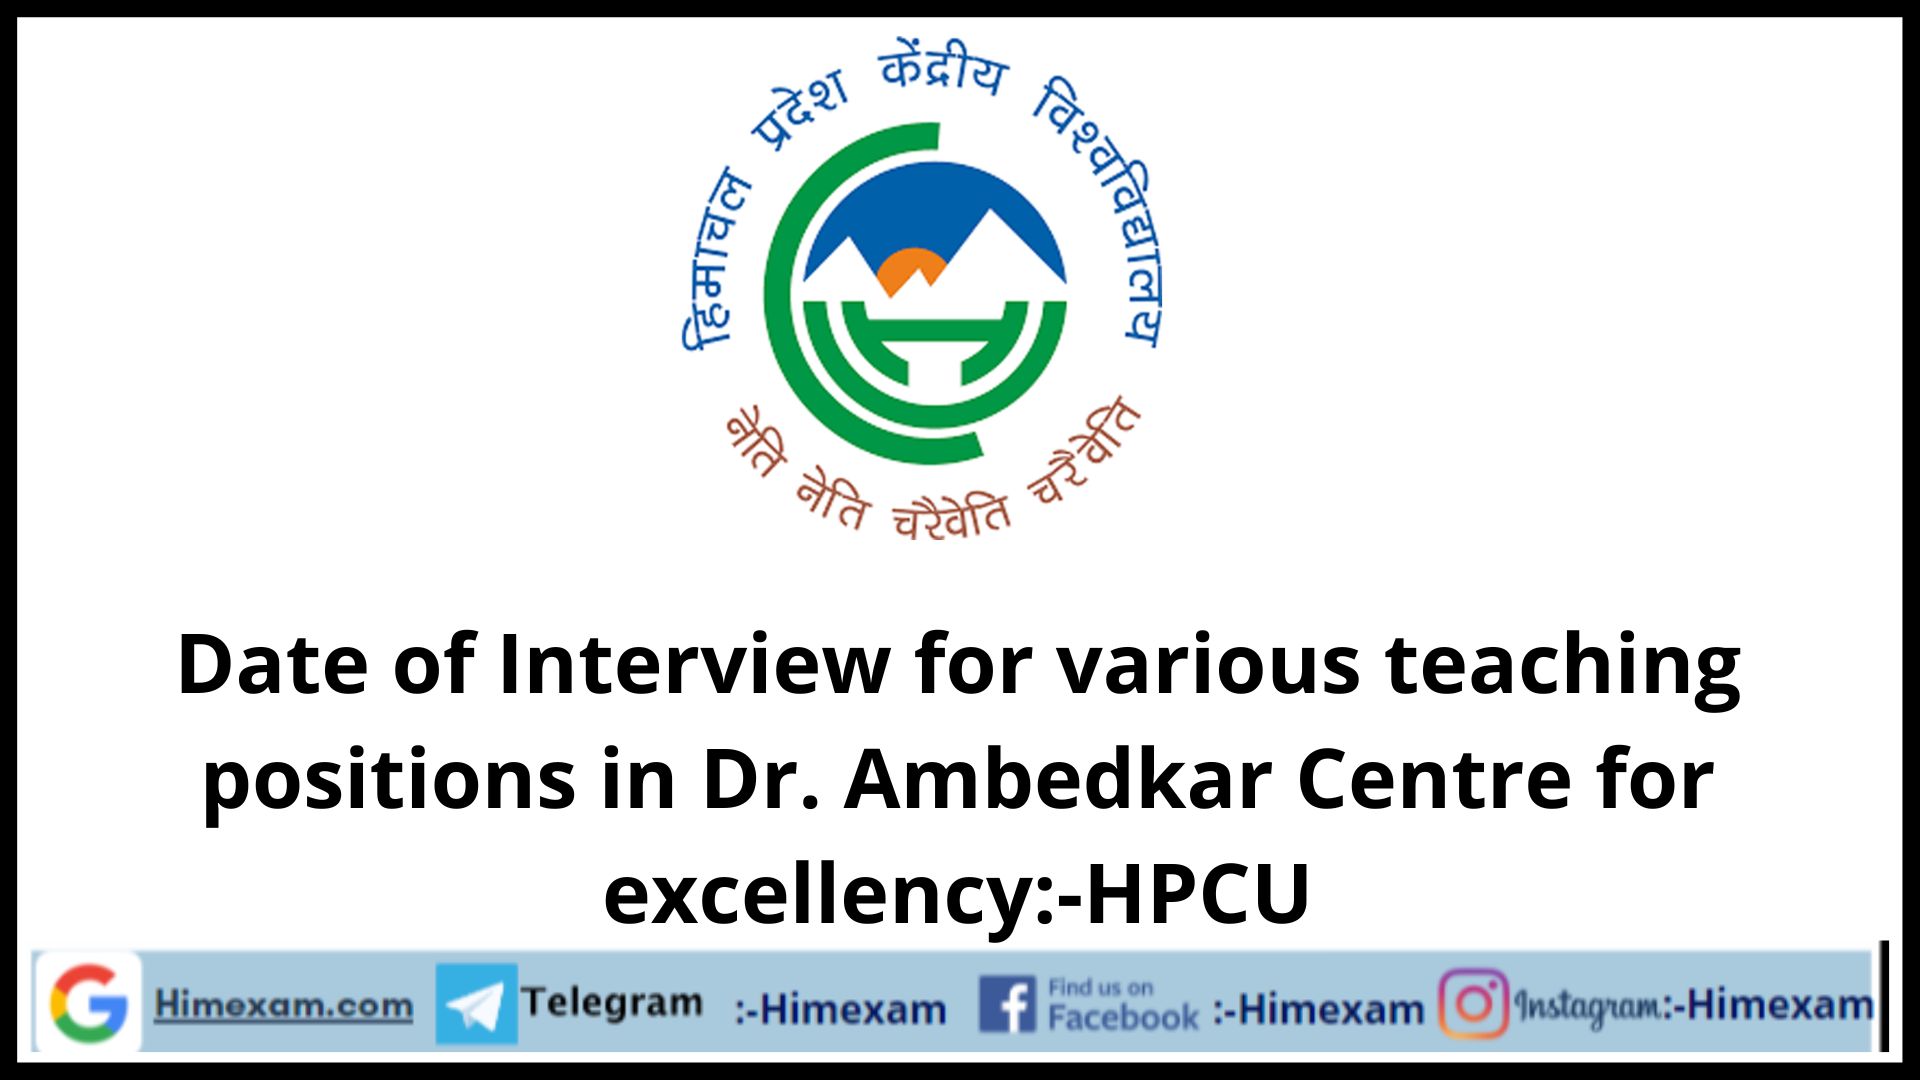 Date of Interview for various teaching positions in Dr. Ambedkar Centre for excellency:-HPCUv